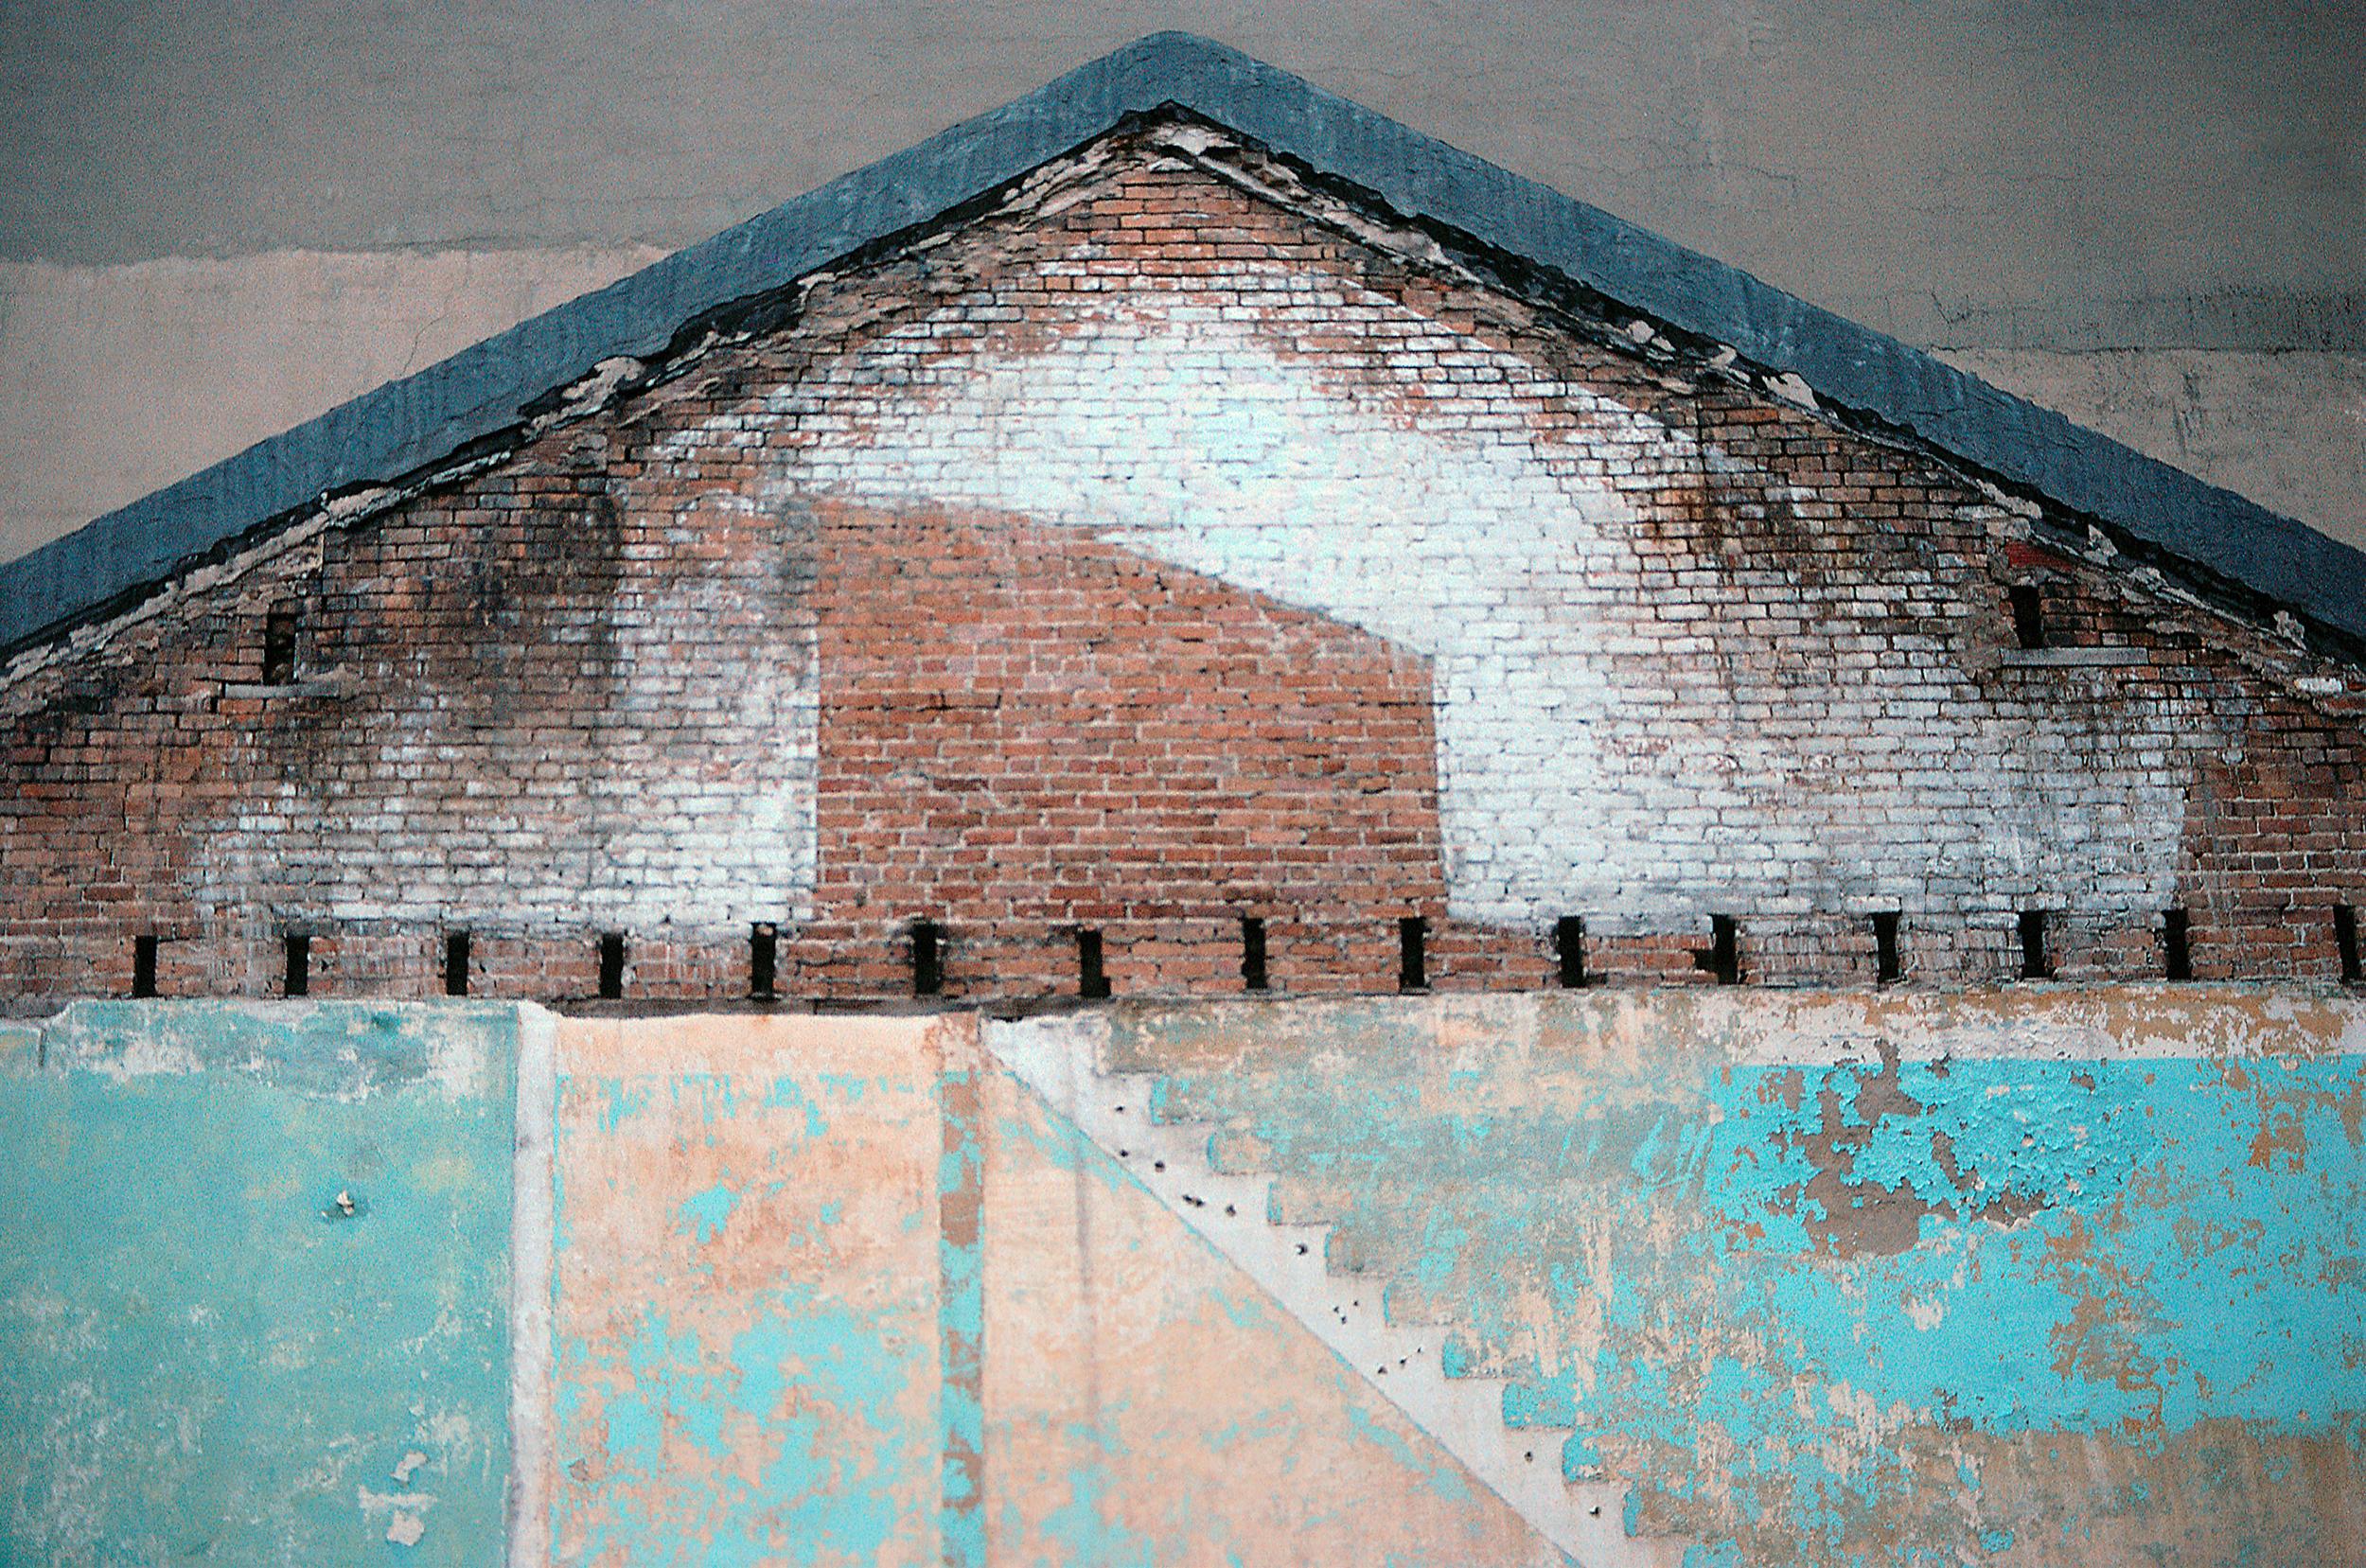 American Contemporary Photo by M.K. Yamaoka - Facade of a Torn-Down Building